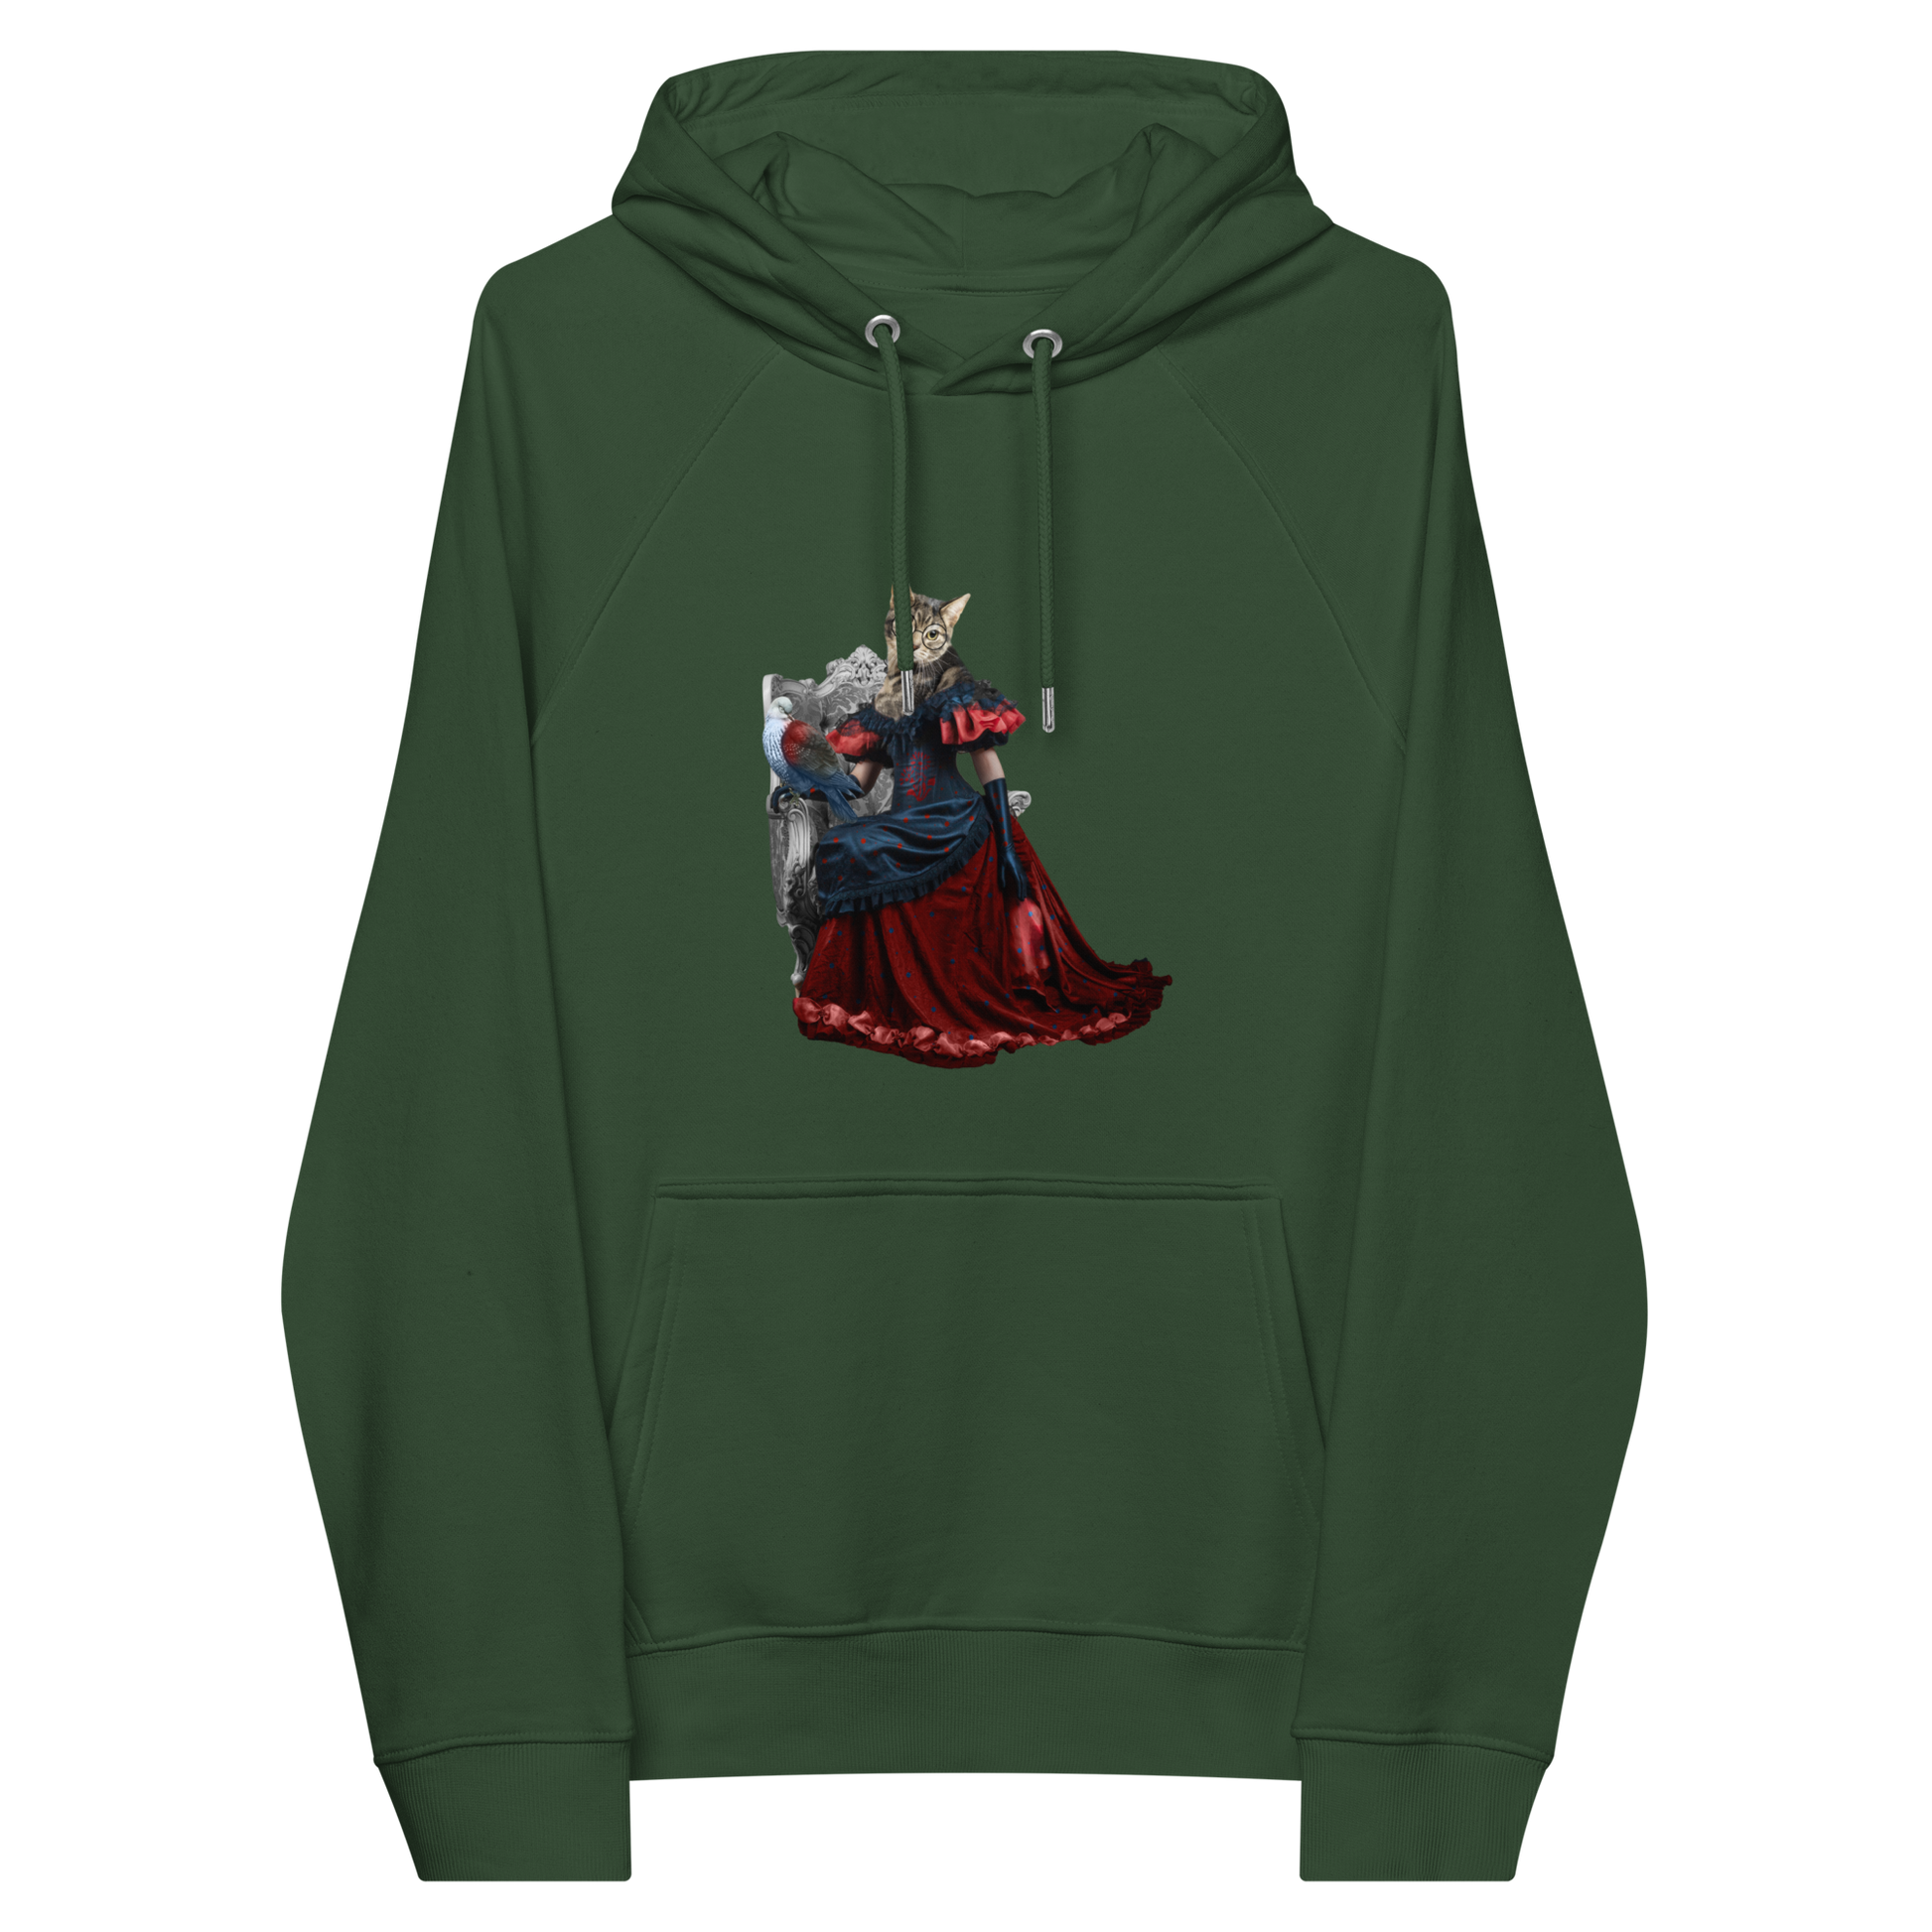 Bottle Green Anthropomorphic Cat Raglan Hoodie featuring an adorable Anthropomorphic Cat graphic on the chest - Cute Graphic Cat Hoodies - Boozy Fox